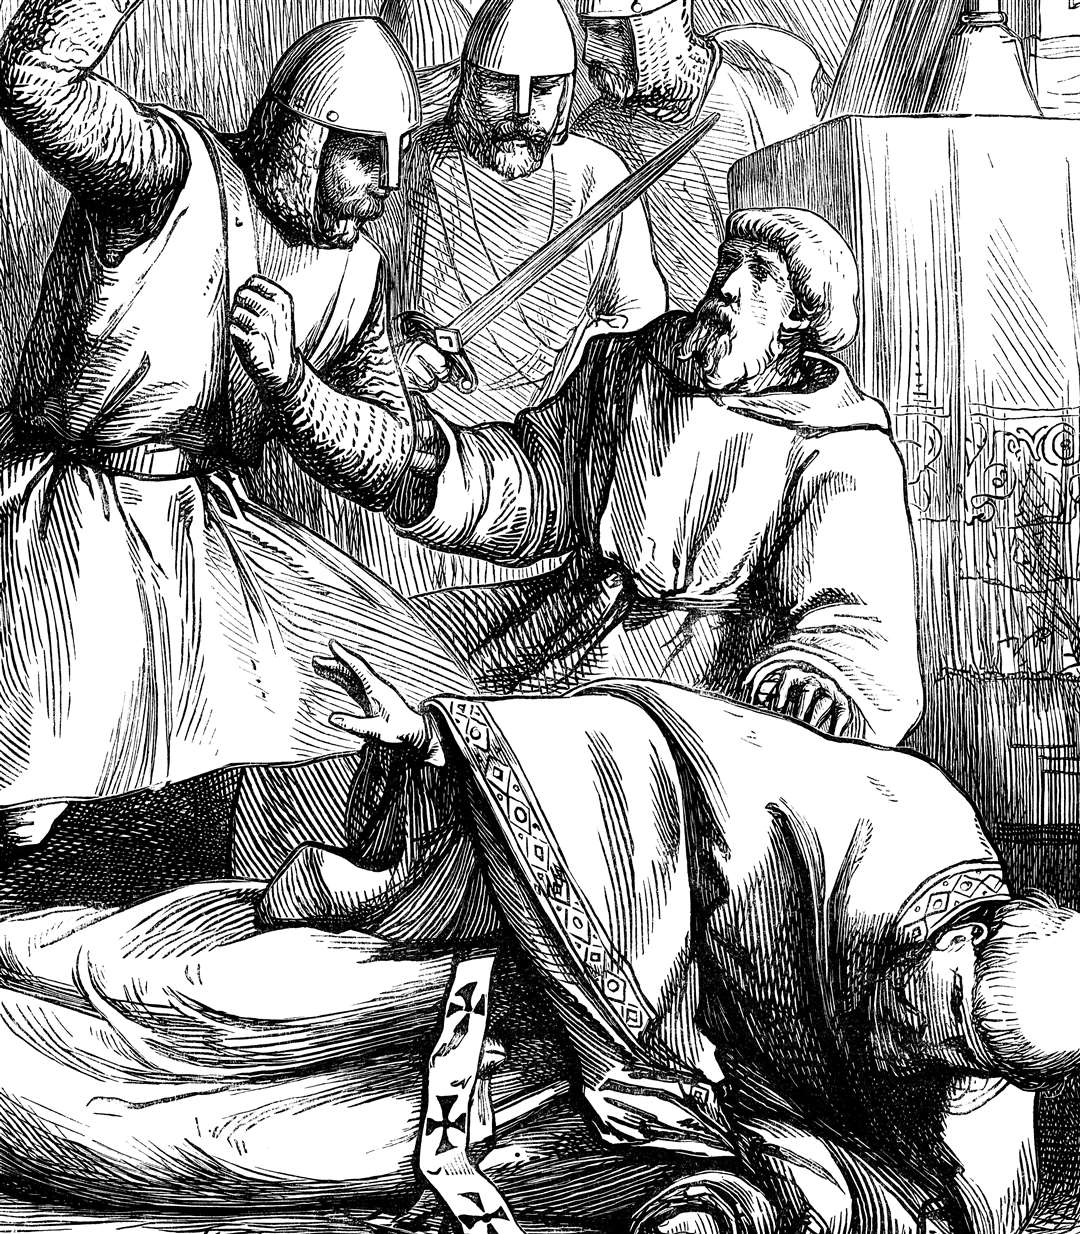 An engraved illustration of the murder of Thomas a Becket at Canterbury Cathedral from a Victorian book dated 1866